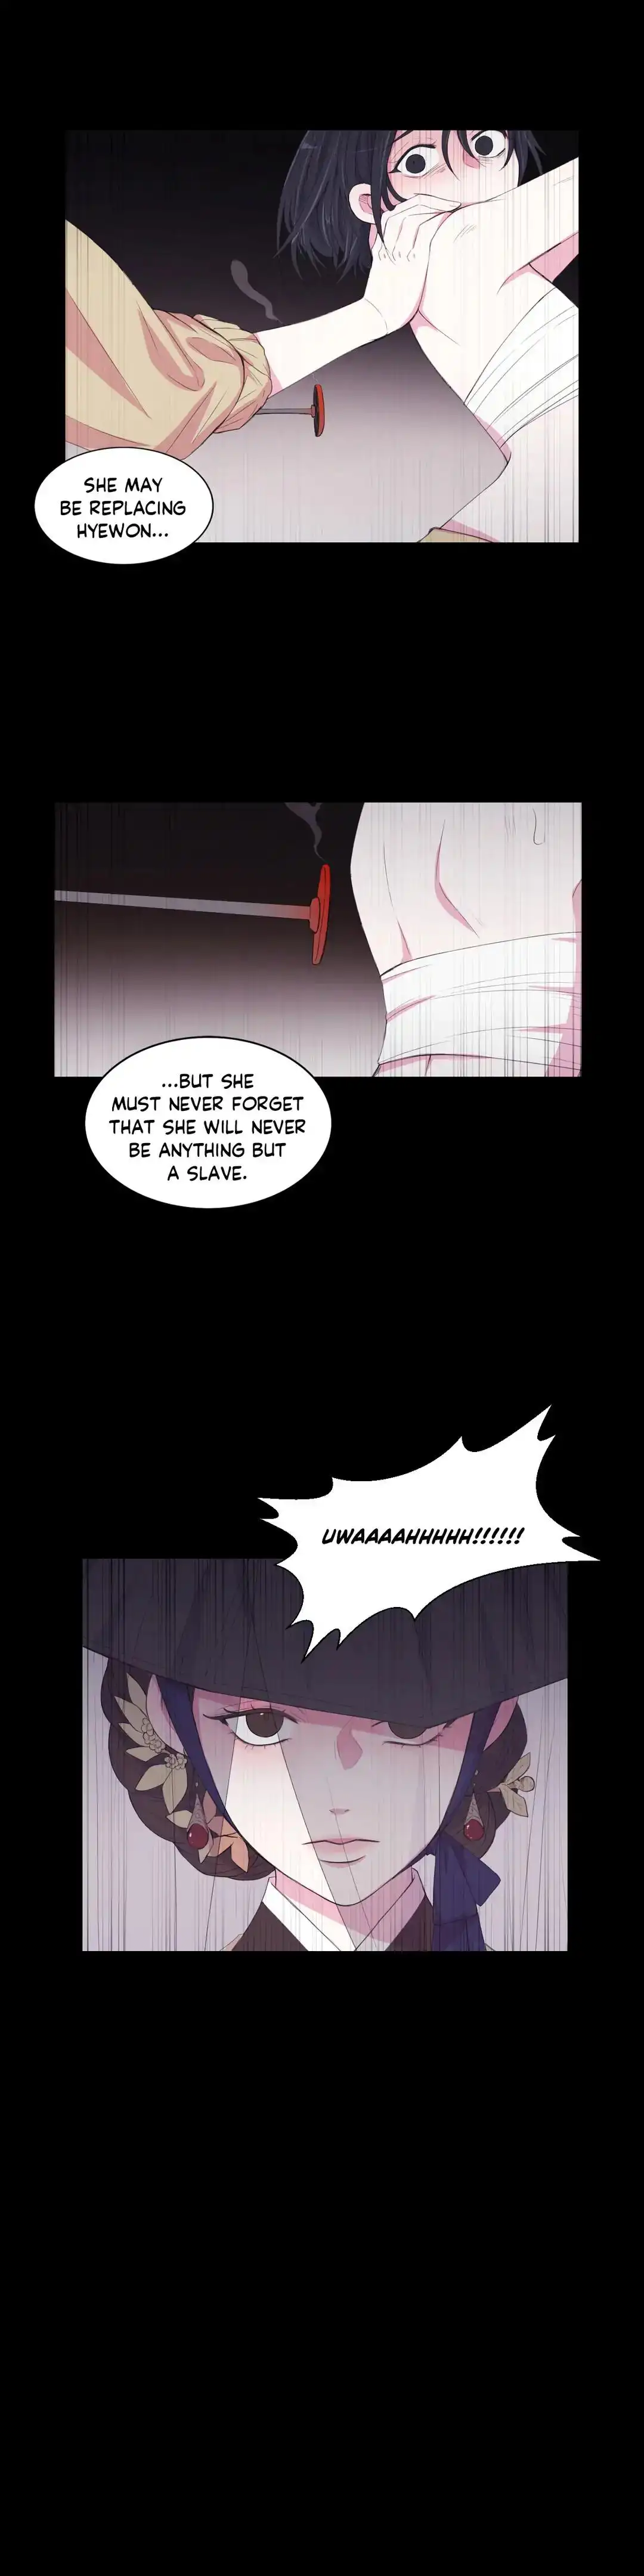 Moonlight Garden - Chapter 79 Page 3